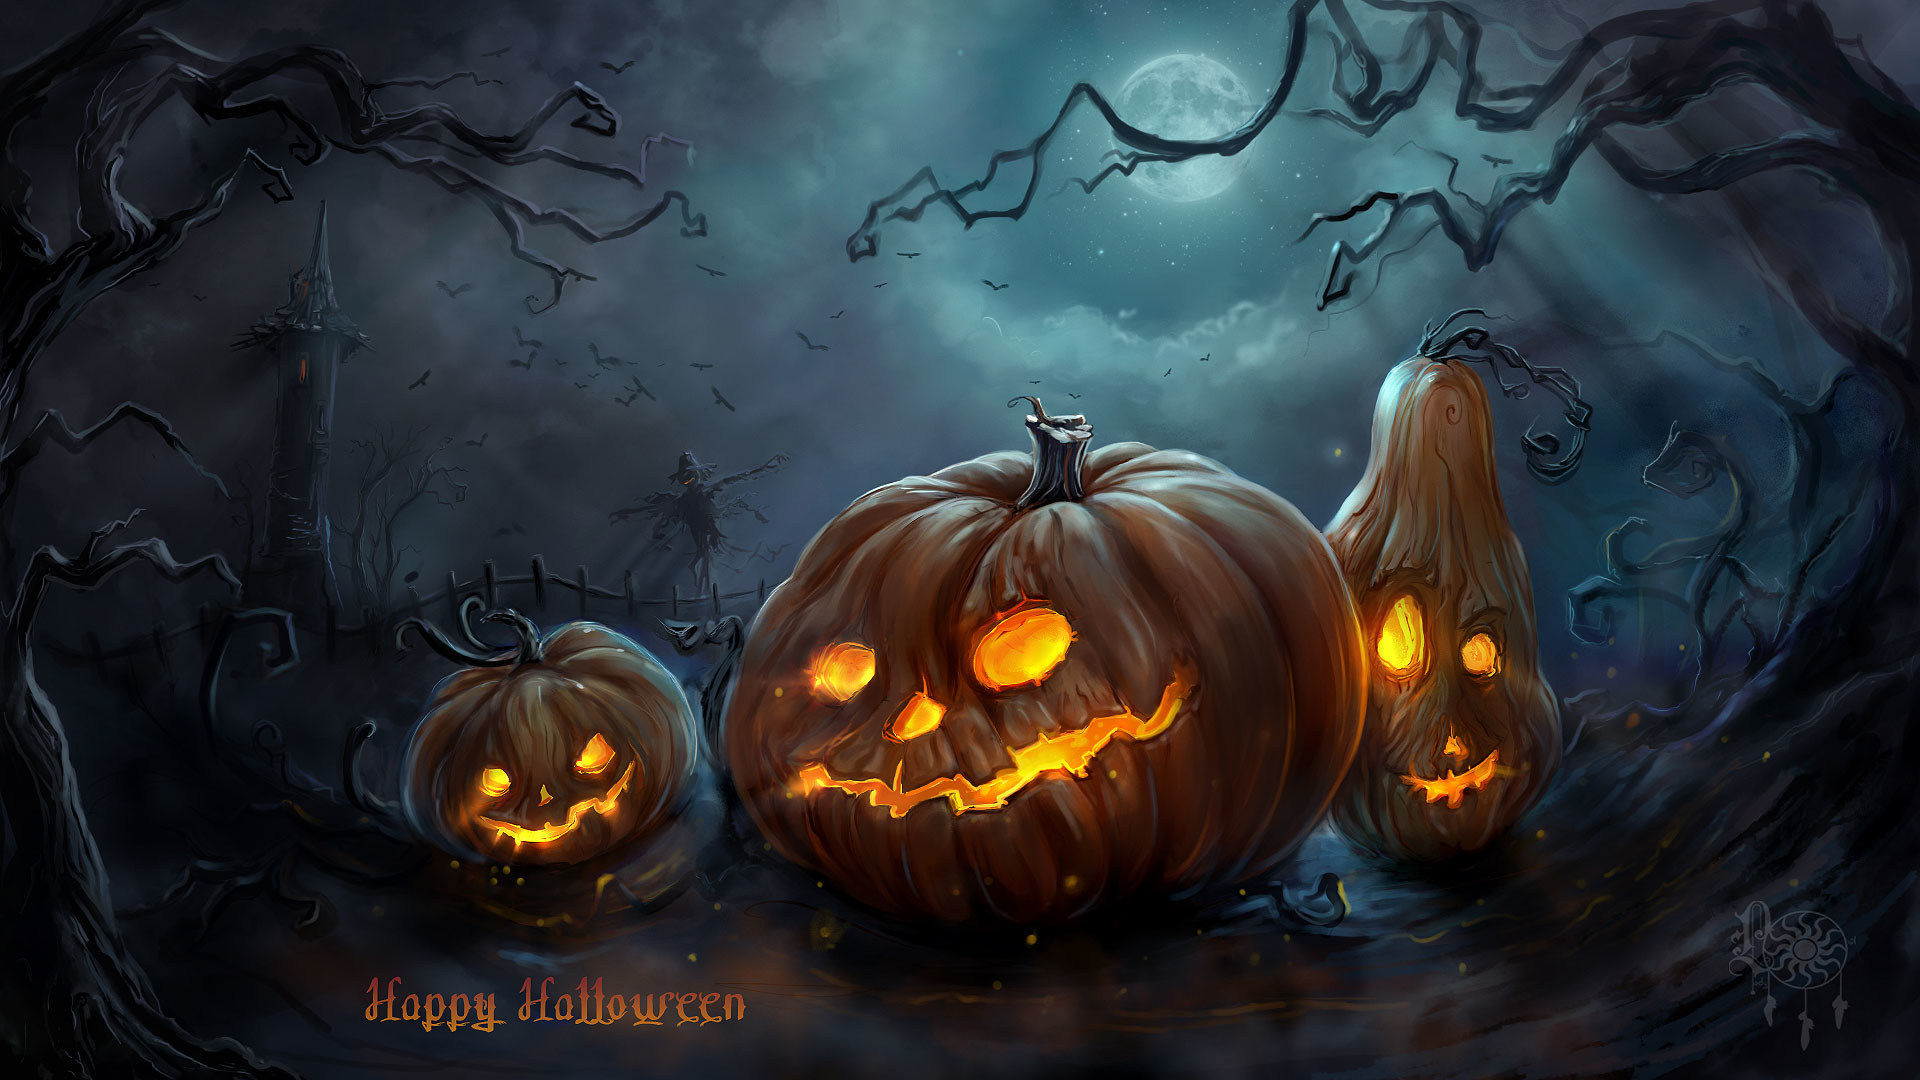 1920x1080 Download Halloween Scarecrow 2014 from the above resolutions. If you .